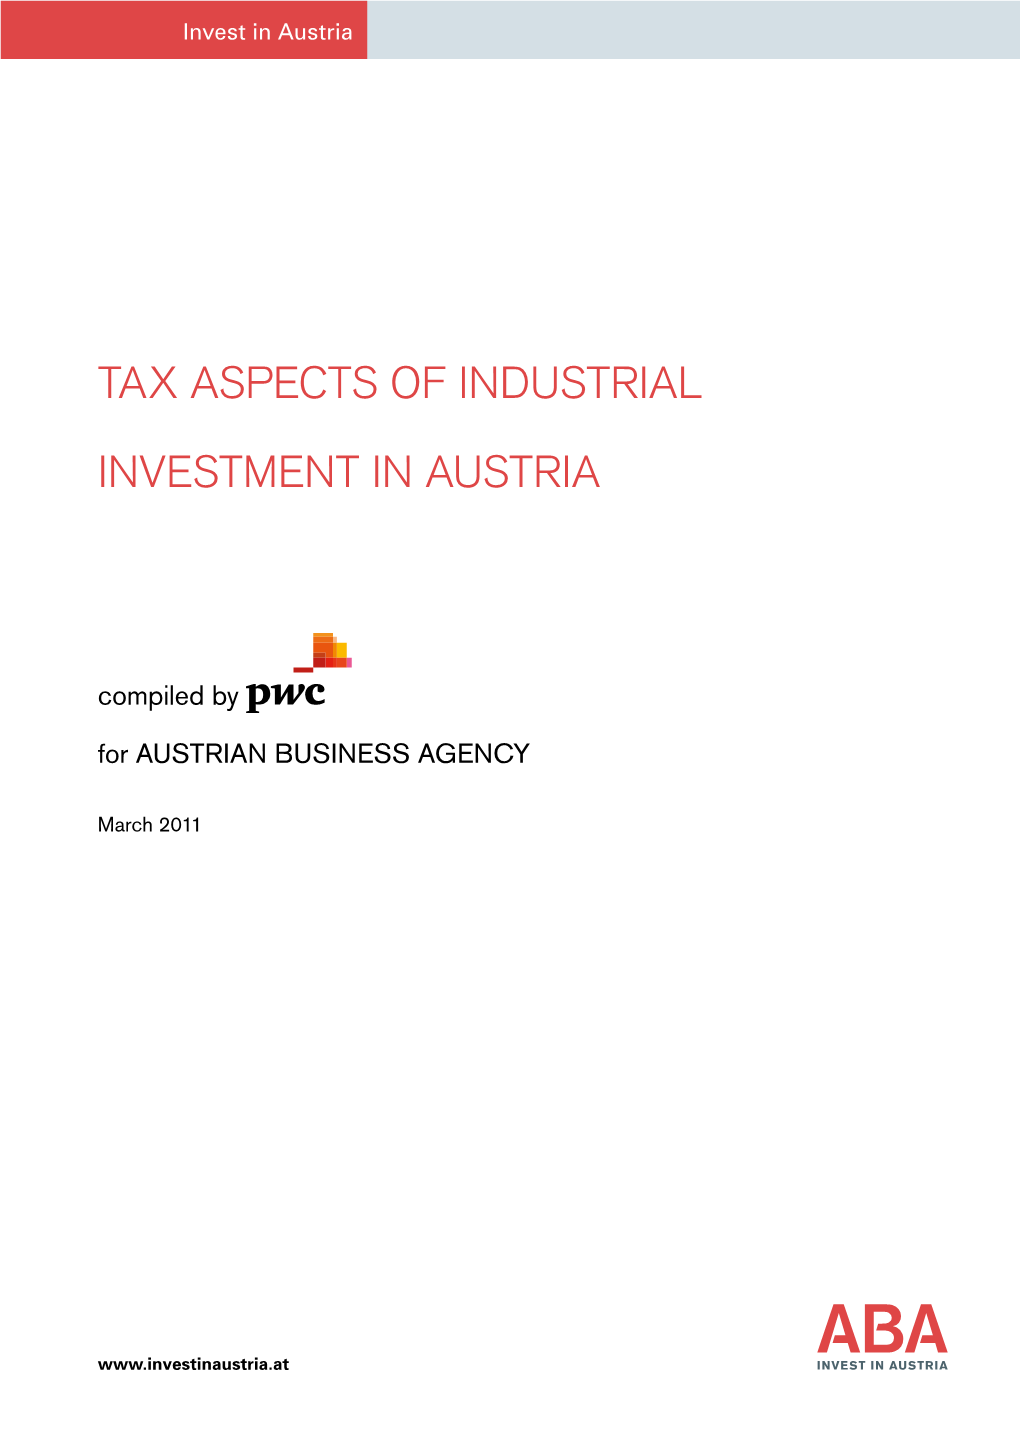 Tax Aspects of Industrial Investment in Austria